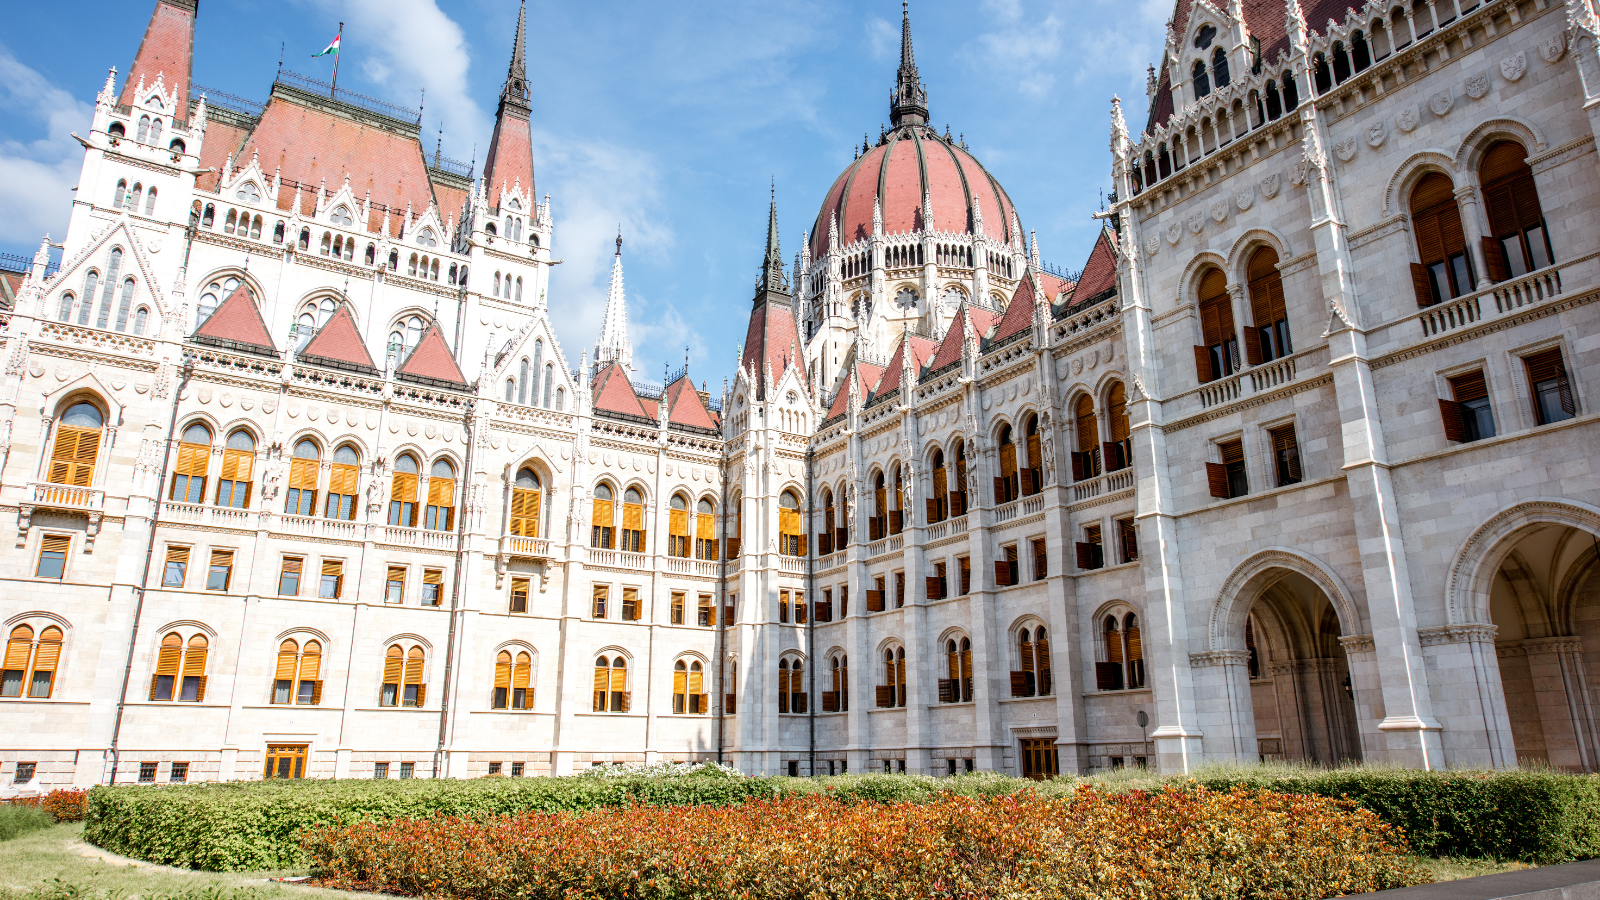 Hungarian Parliament Building - bus rental in Budapest for 1 day